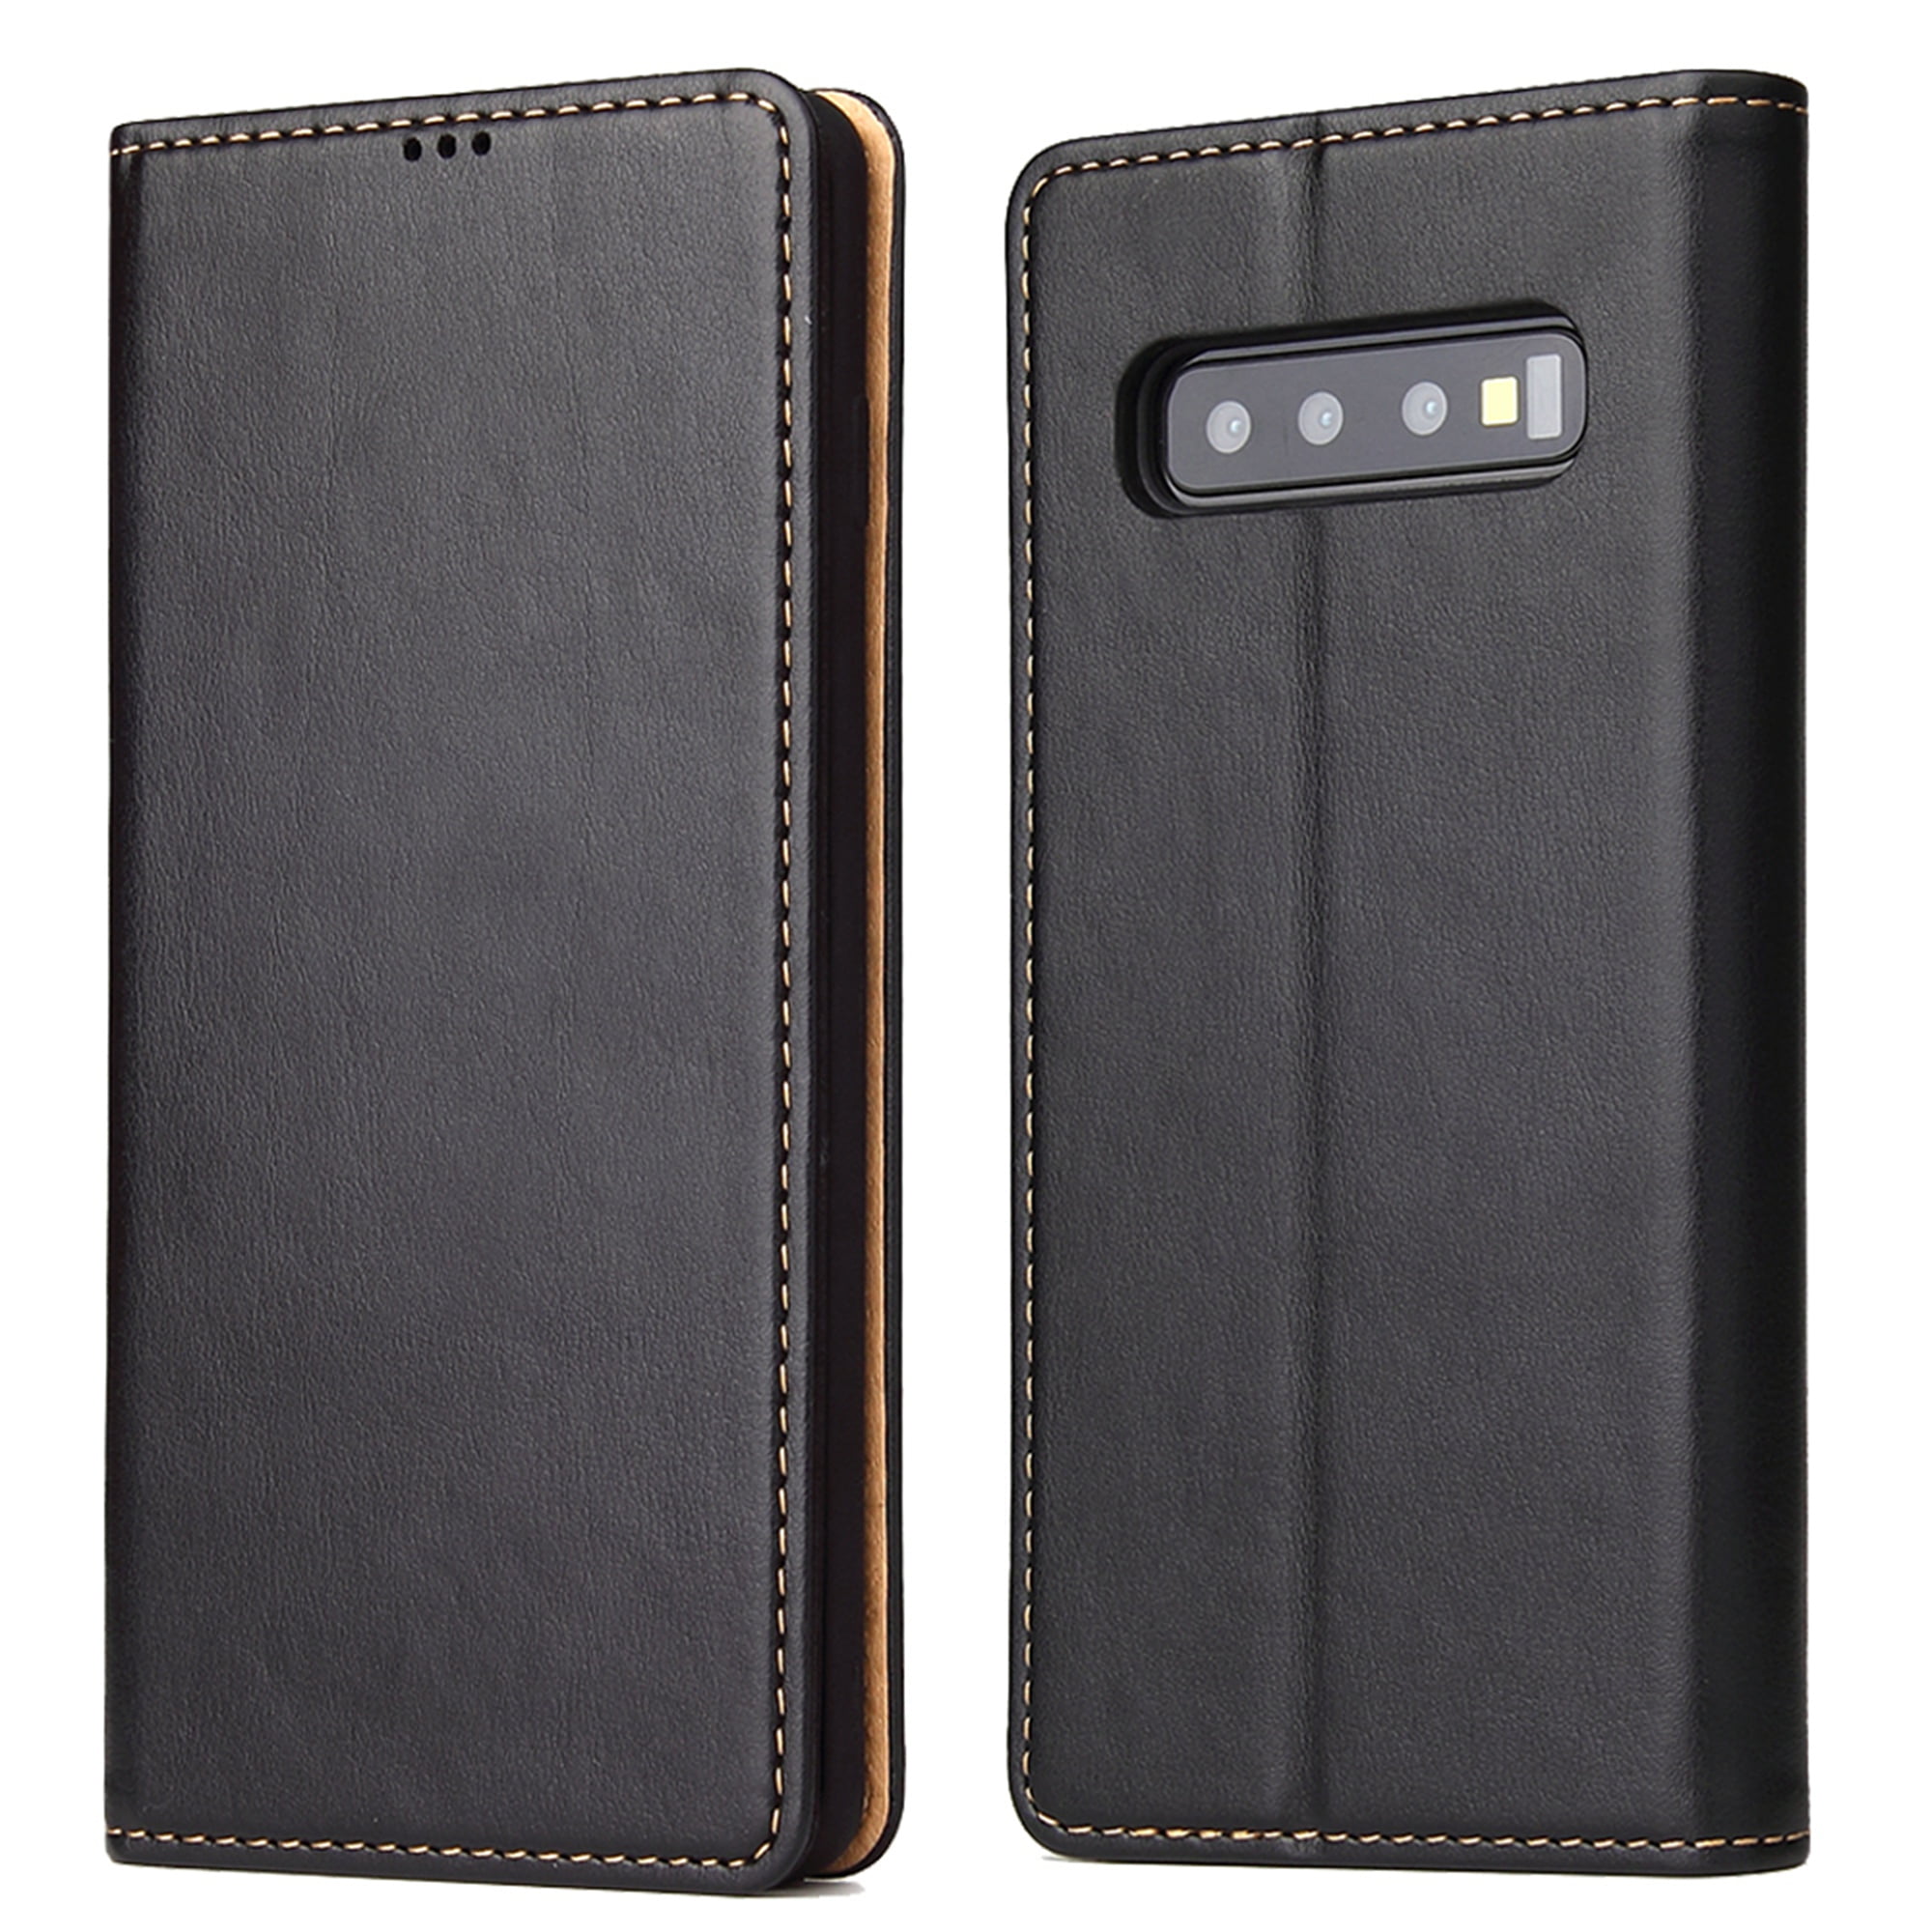 Simple Flip Case Fit for Samsung Galaxy S10 Plus tree2 Leather Cover Wallet for Samsung Galaxy S10 Plus 